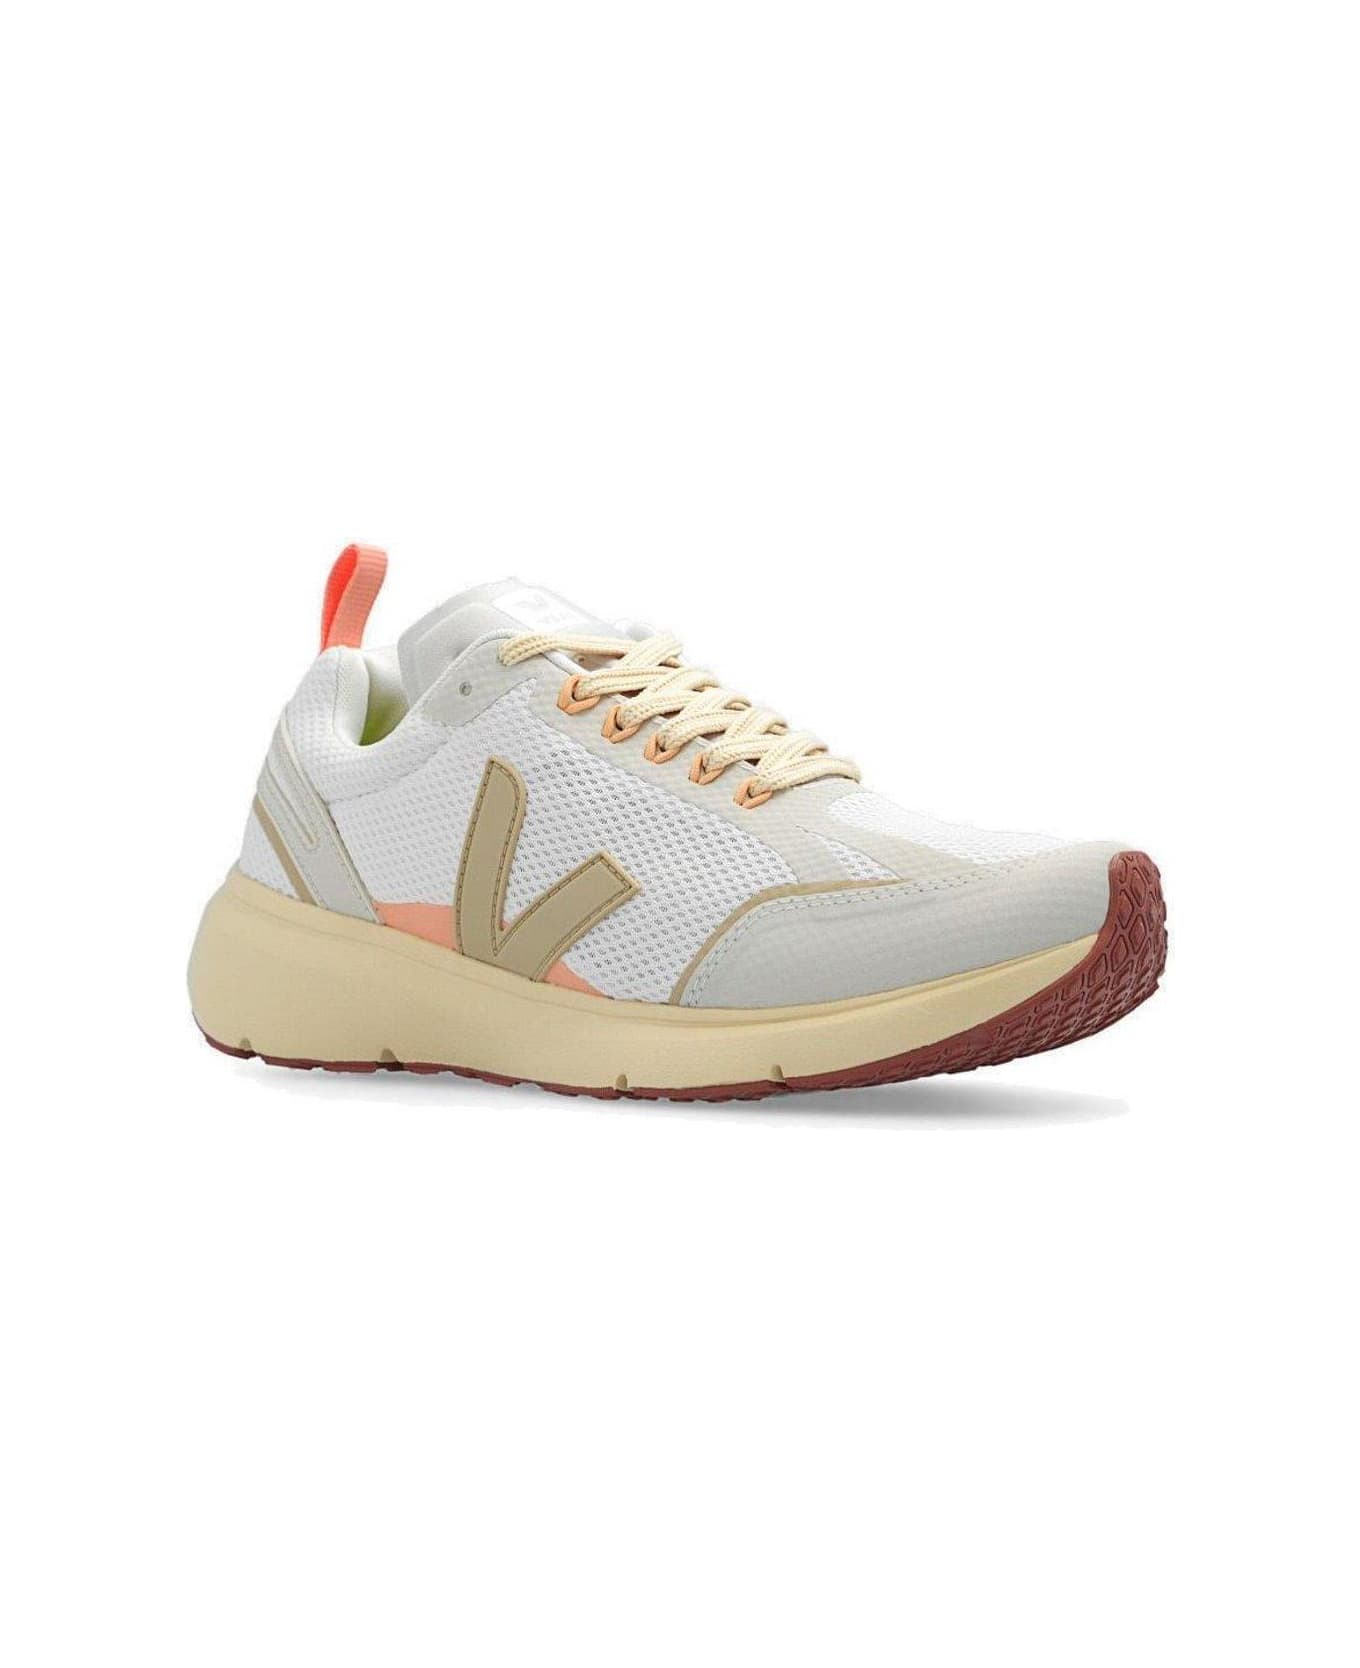 Veja Condor 2 Lace-up Sneakers - Gravel Almond